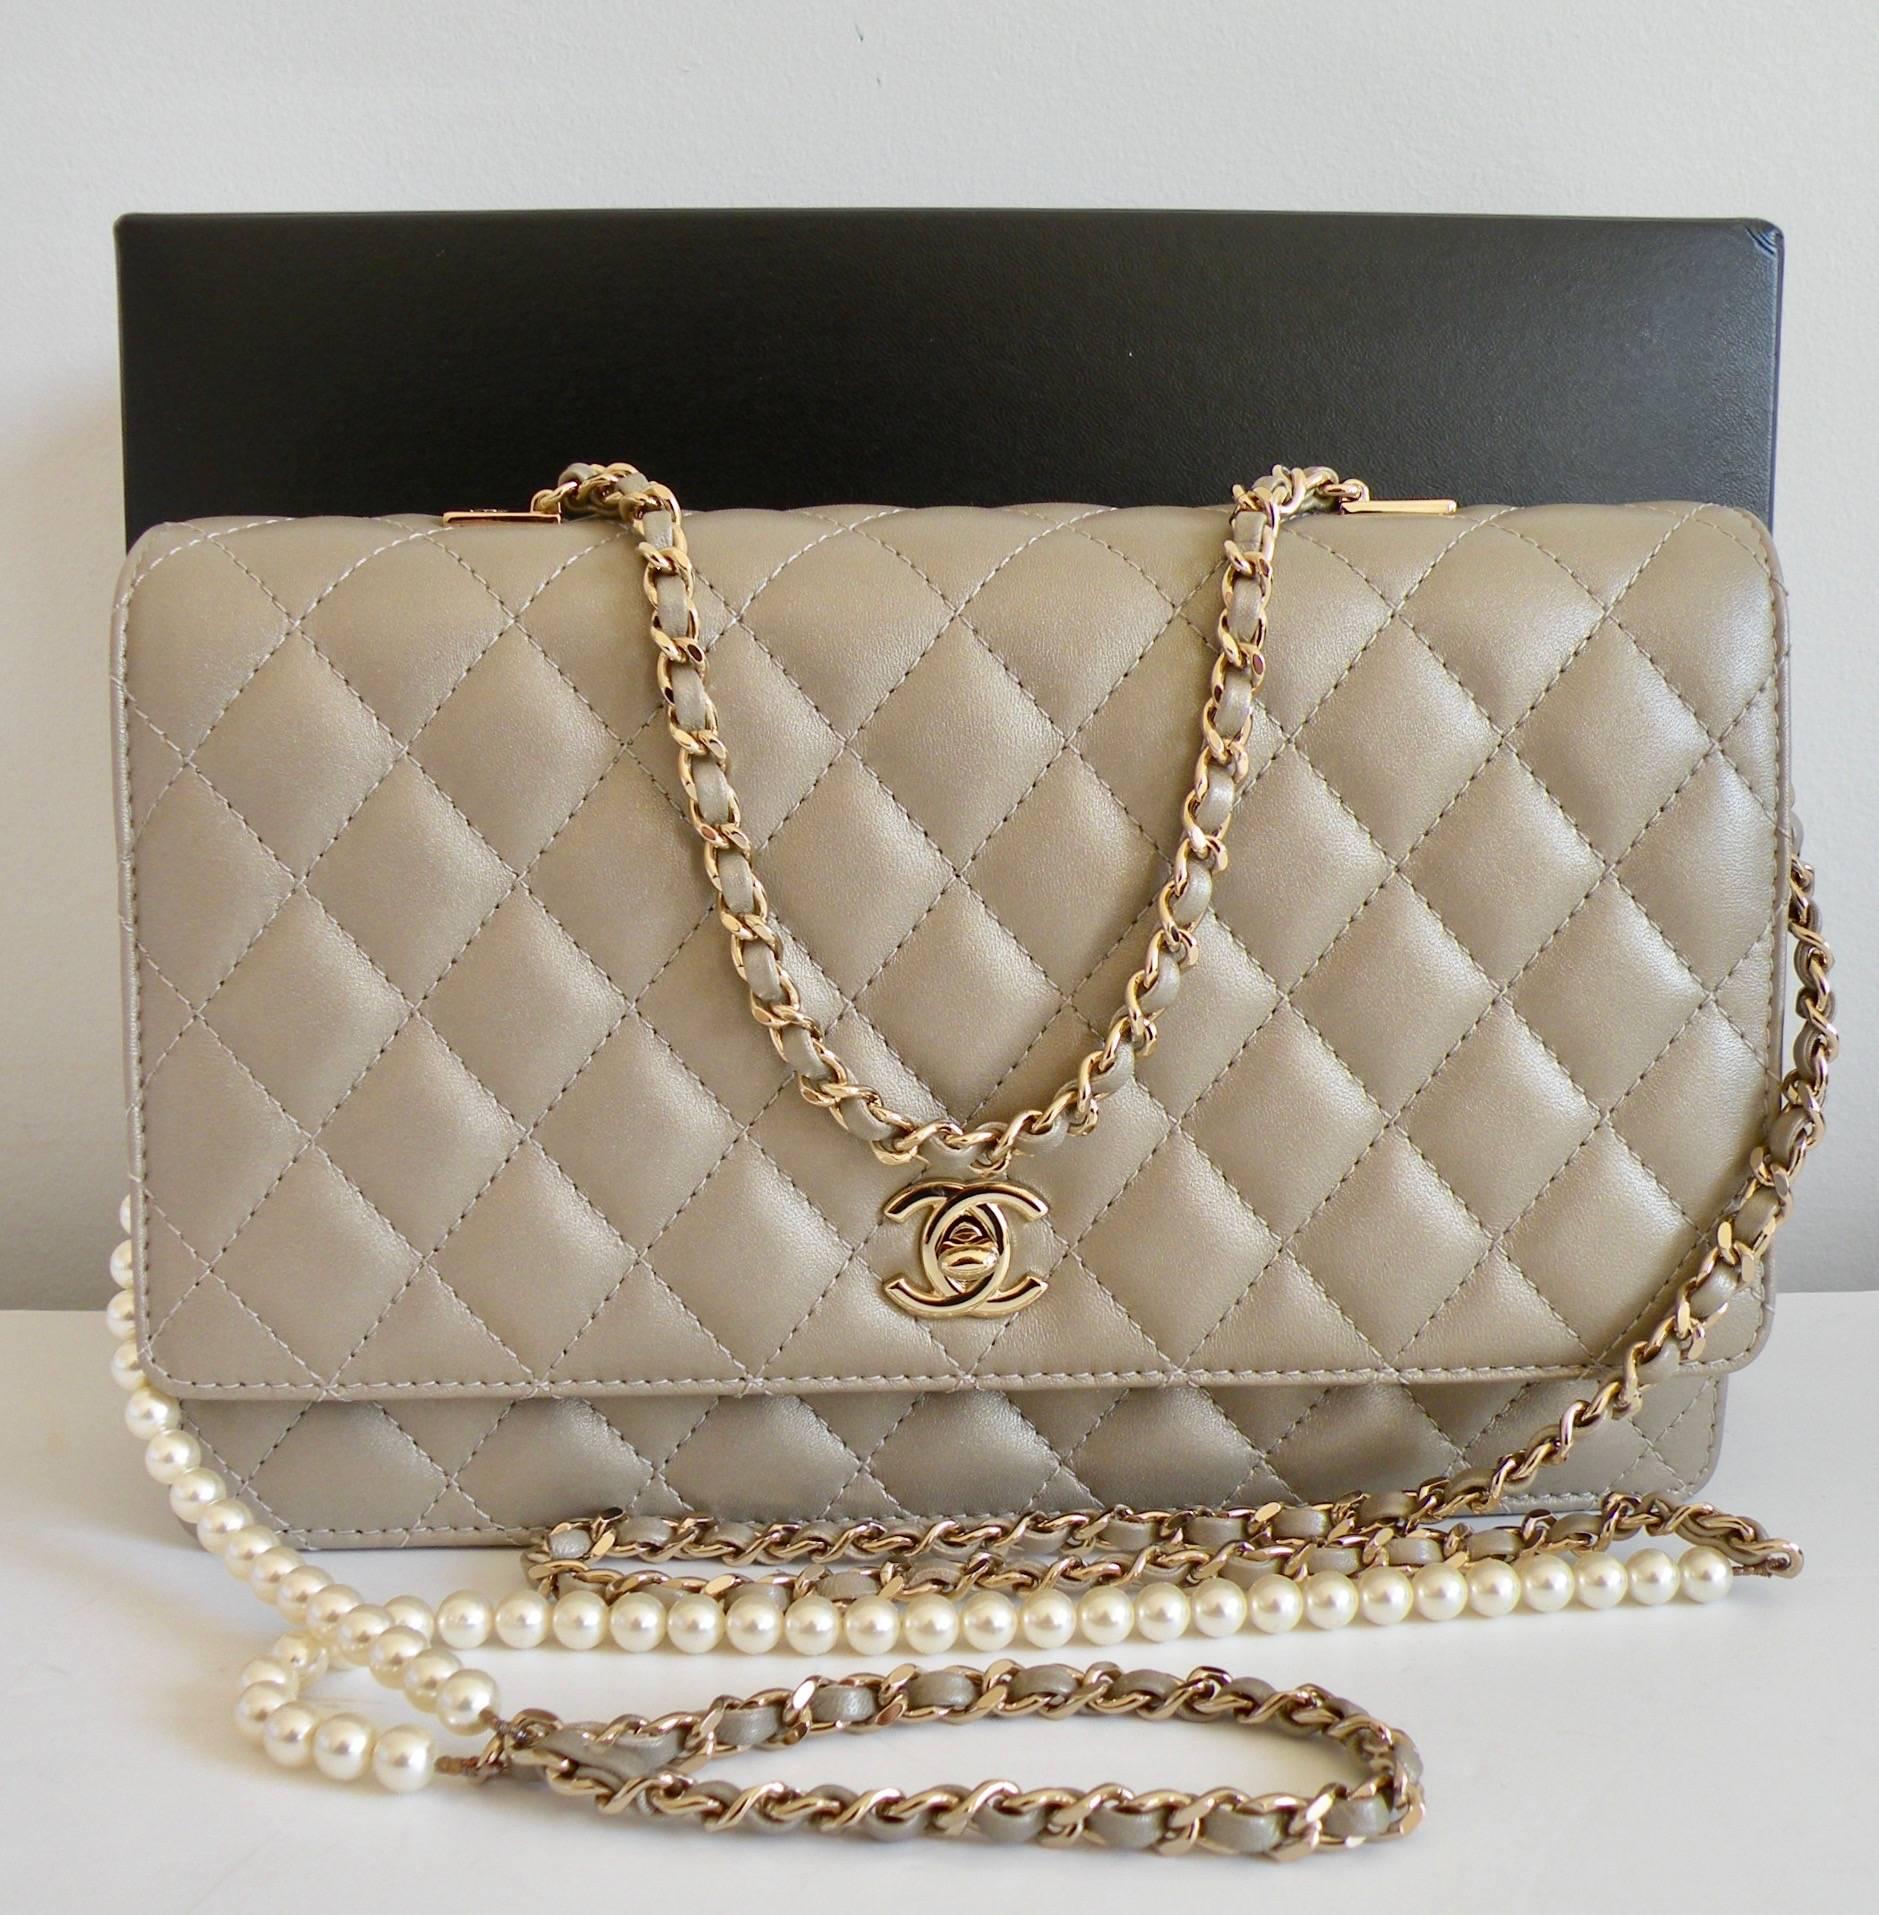 CHANEL

Flap Bag

Gold Lambskin

Fantasy Pearls
Such a pretty, elegant handbag

Light Gold Metal

Removable Pearl Chain so you can use as a shoulder, a clutch, or a hand carry with short chain

Lambskin

Color: Gold

Size: 5.9 x 9.8 x 3.1 inches

15